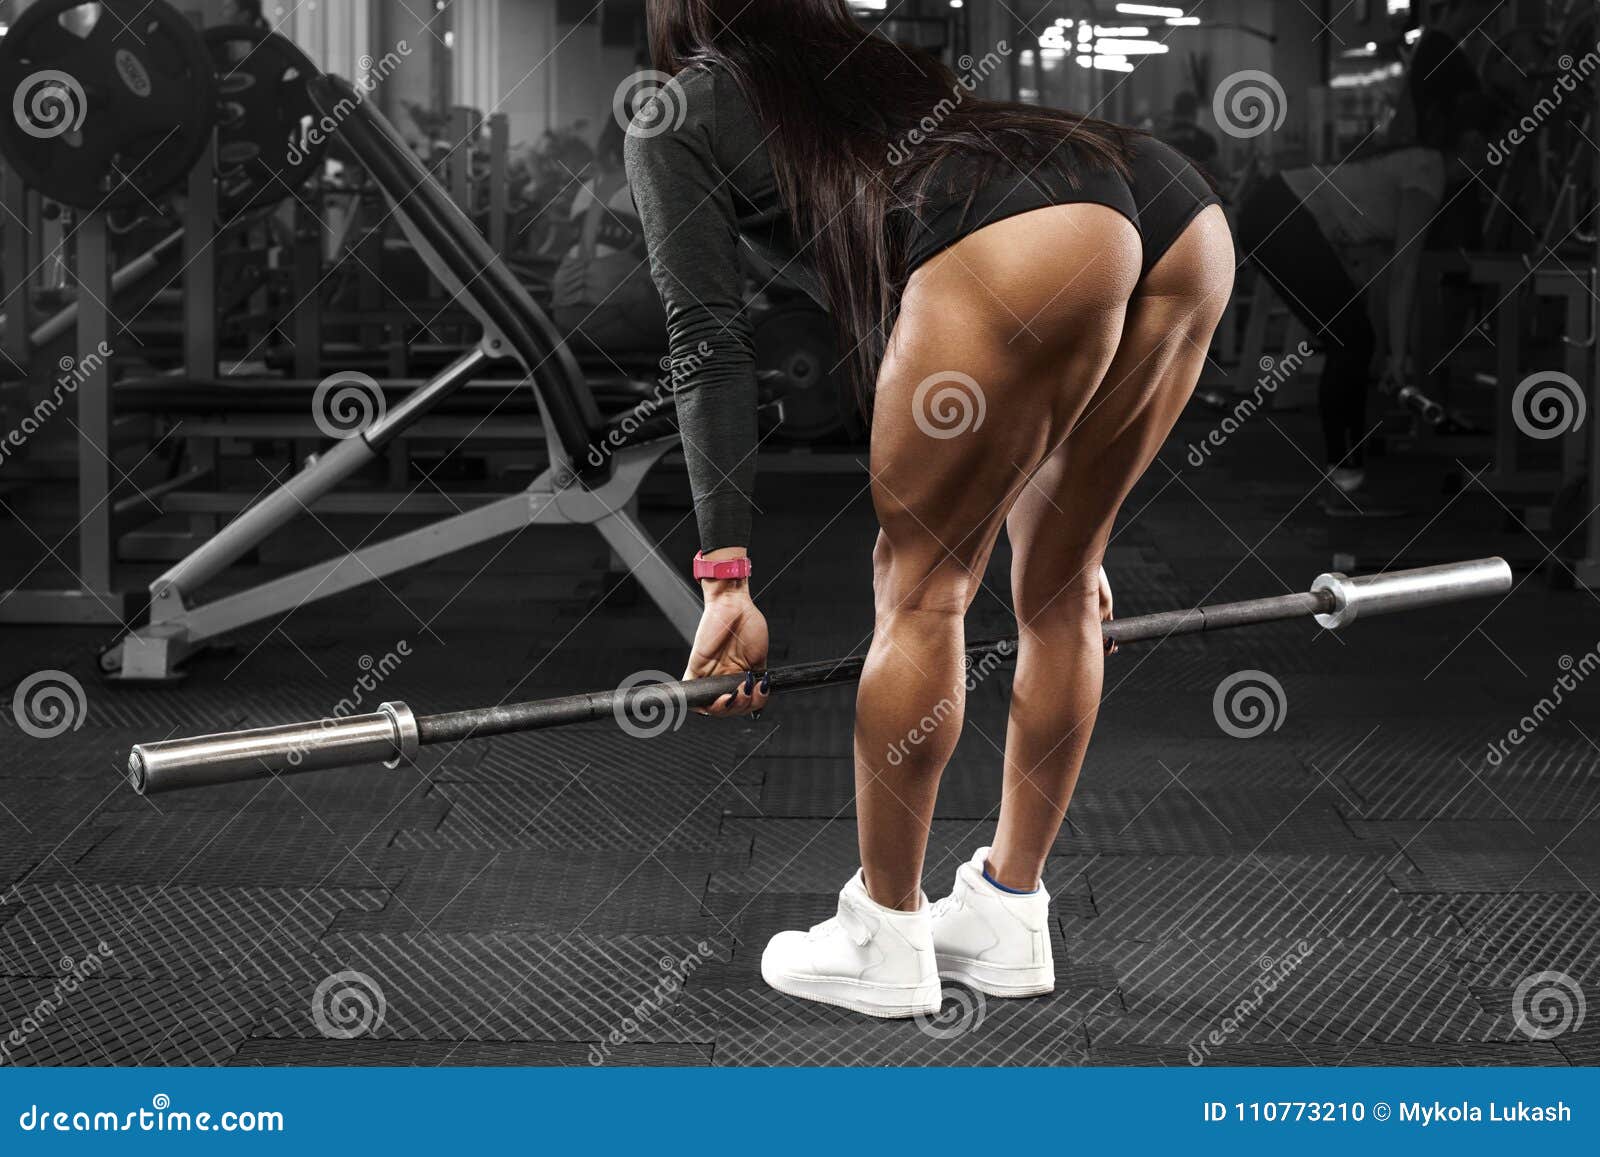 Muscular women big ass Muscular Woman In Gym Training Buttocks And Legs Workout In Thong Stock Photo Image Of Squats Training 110773210